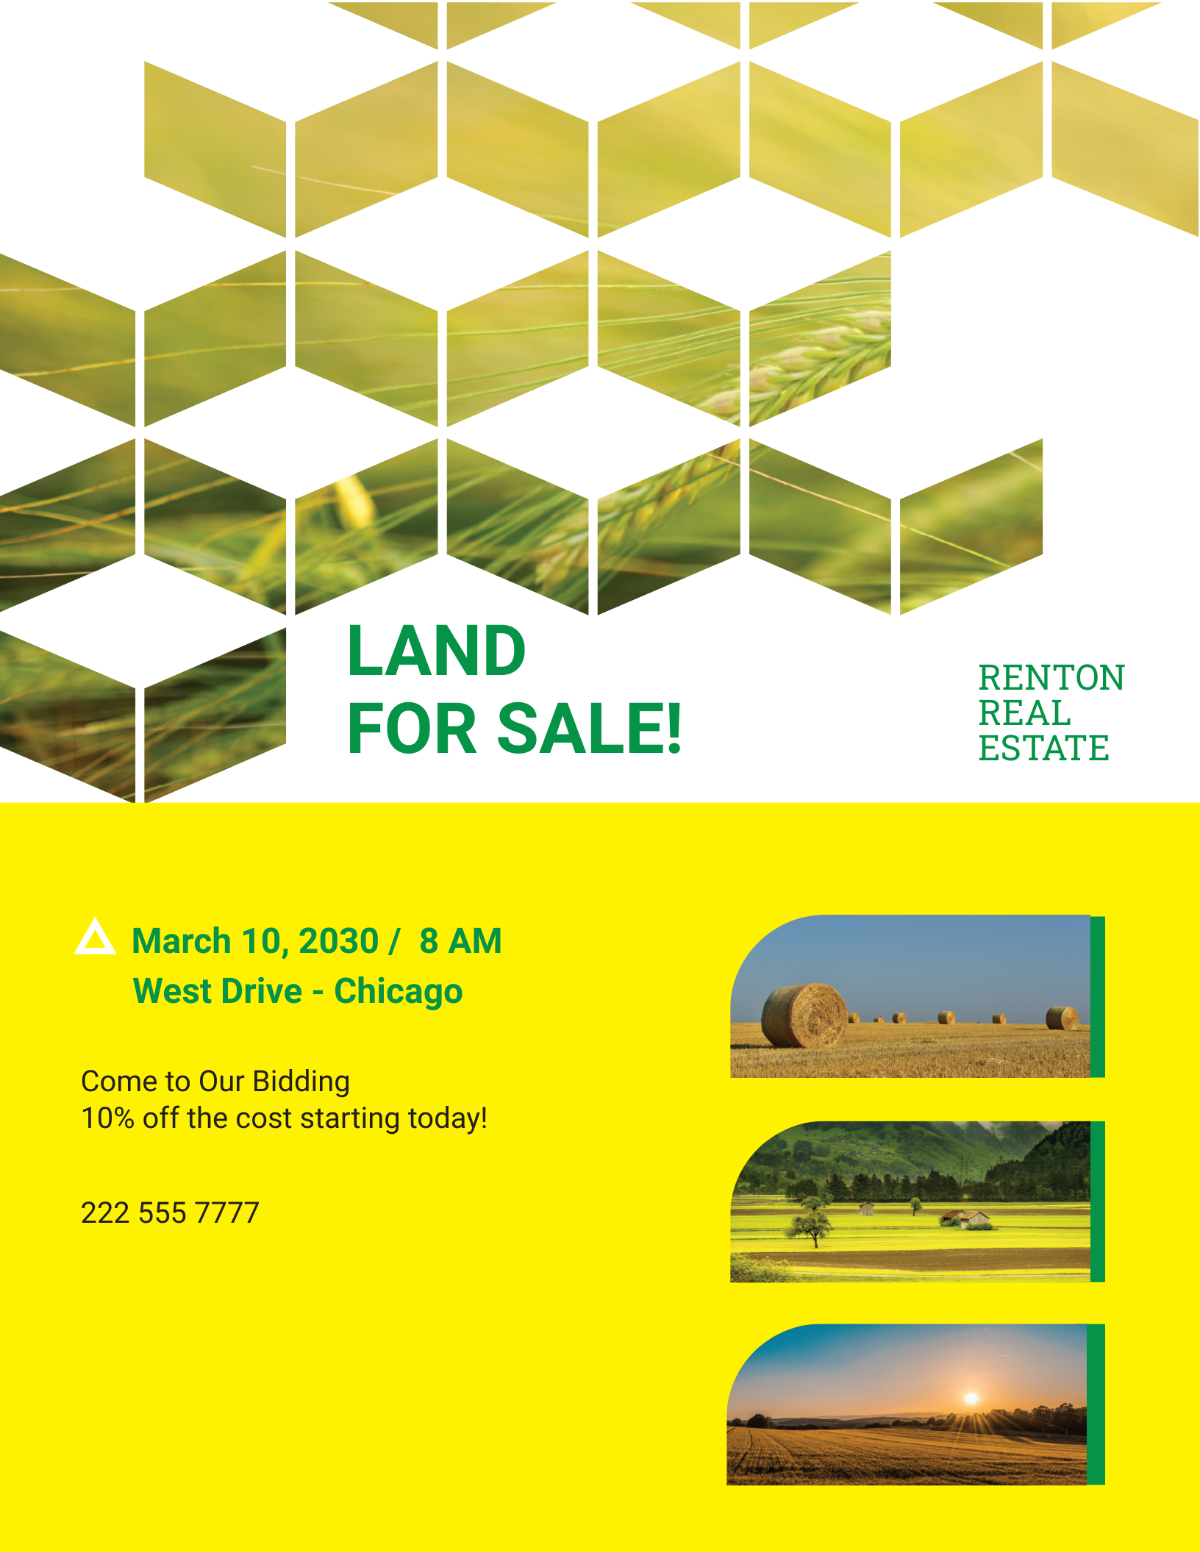 Land For Sale Flyer Template